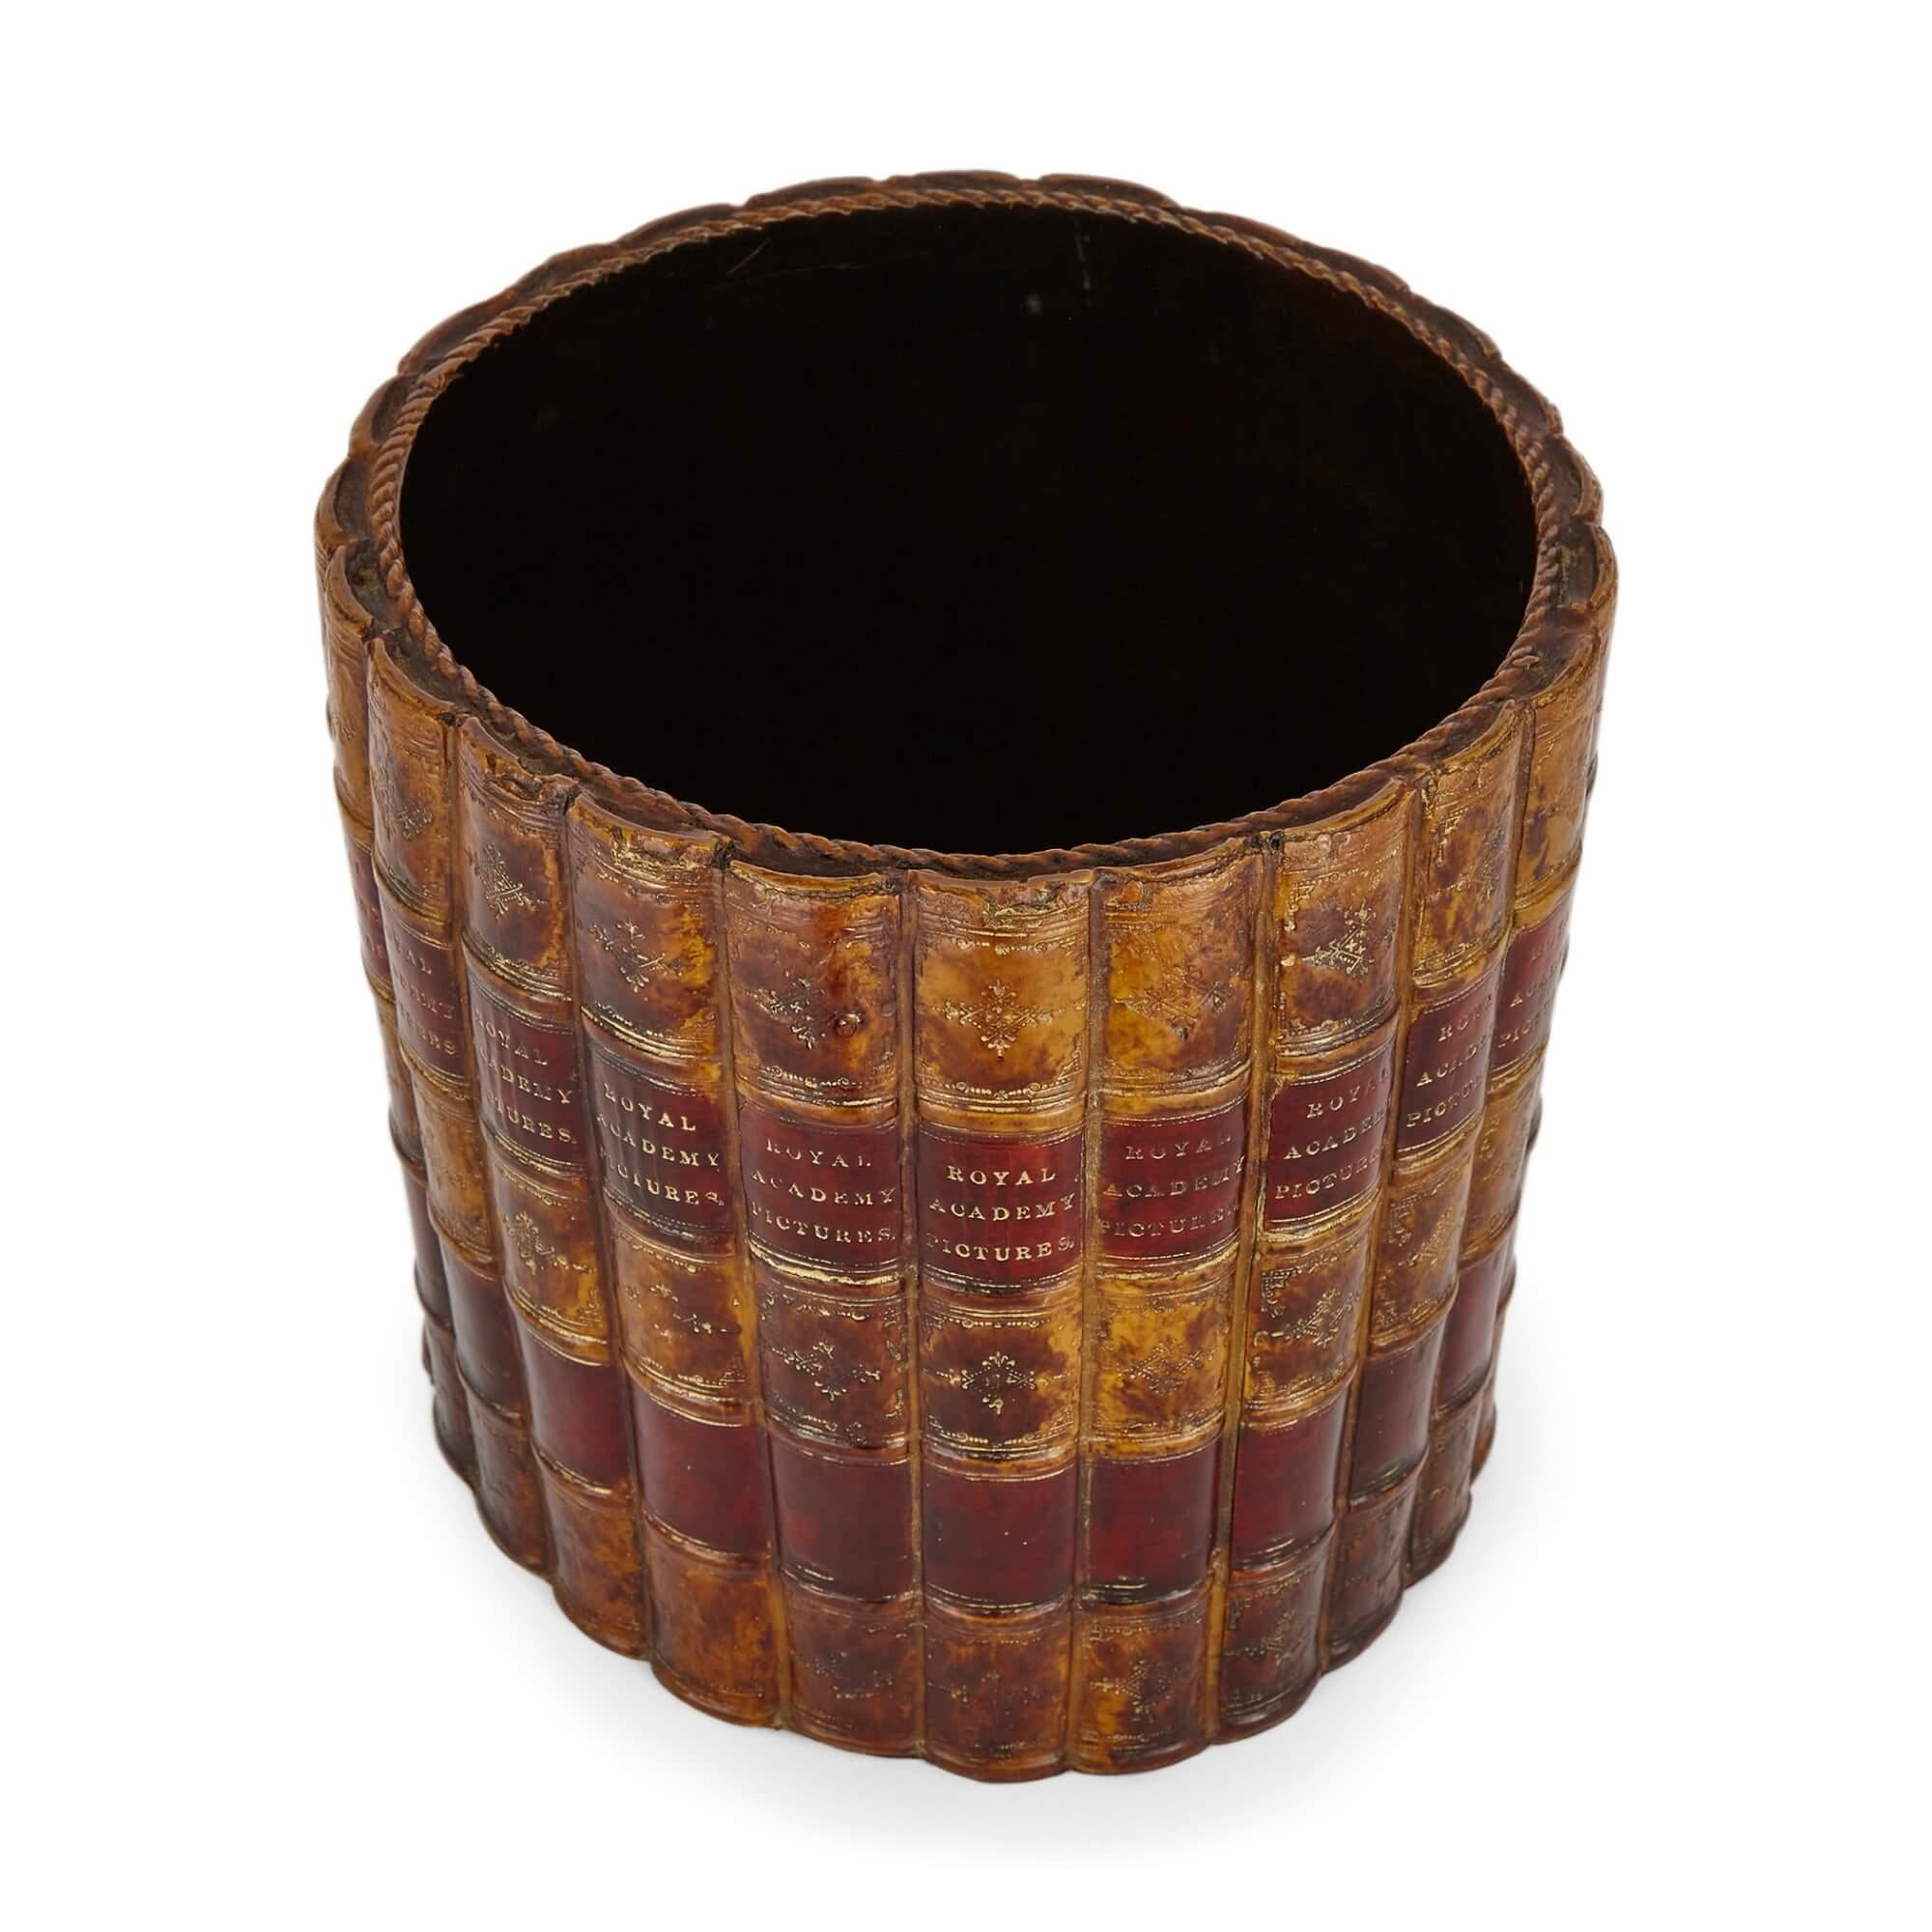 A lacquered Edwardian style novelty faux book spine waste paper basket
English, 20th century
Height 22cm, diameter 23cm

This quirky and curious piece is a English, early 20th century, Edwardian style lacquered waste paper basket made to give a